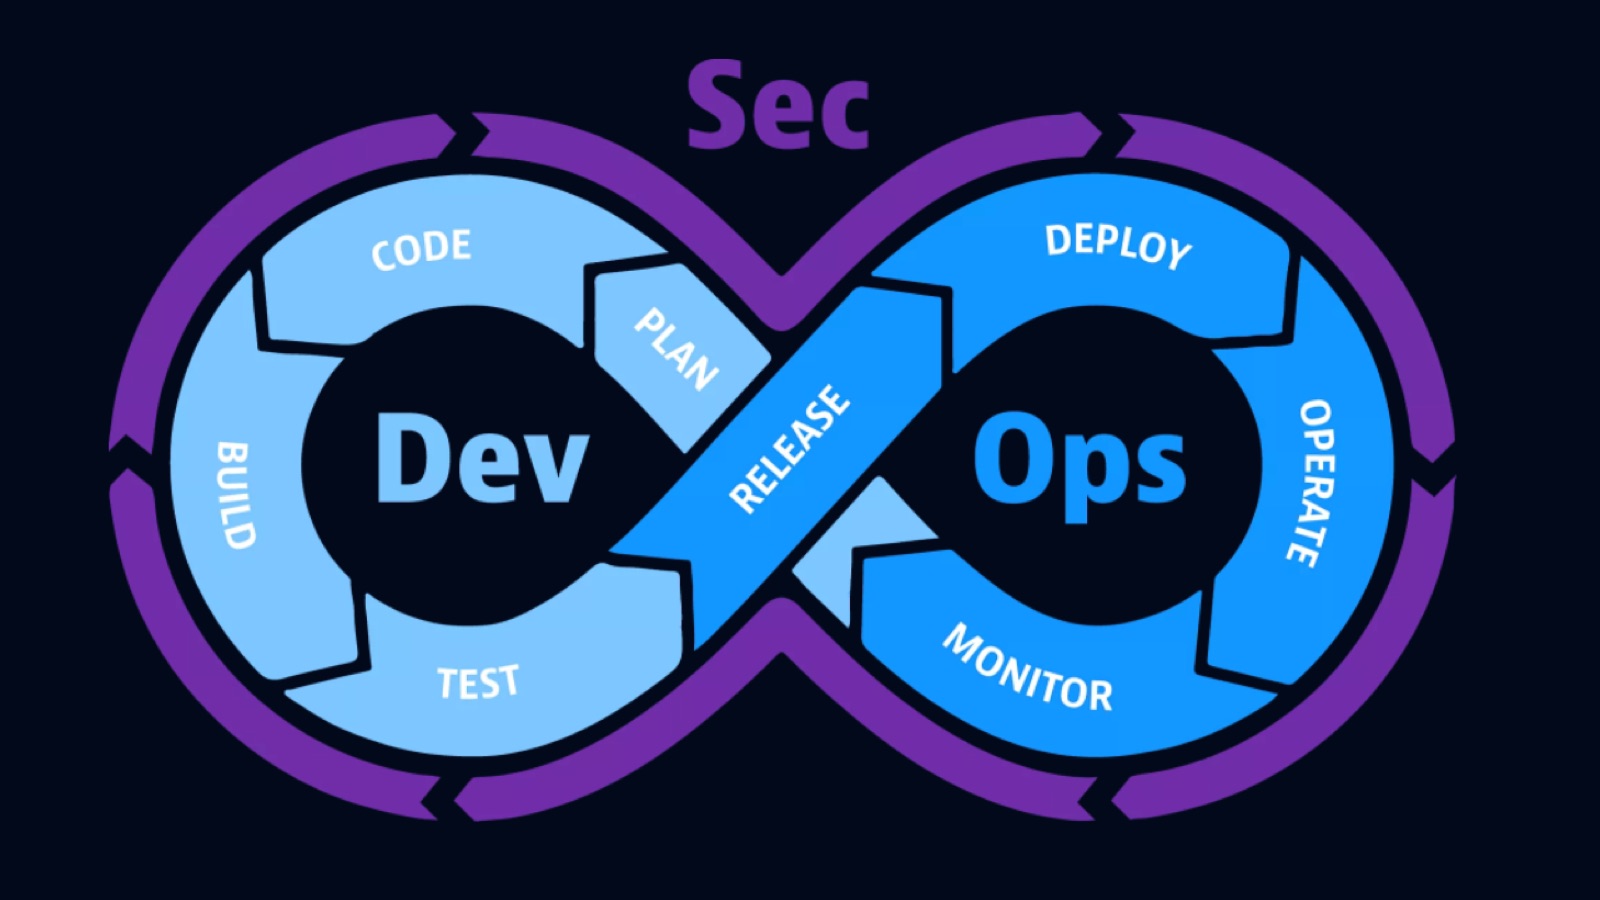 How organizations can build a strong DevSecOps maturity model based on